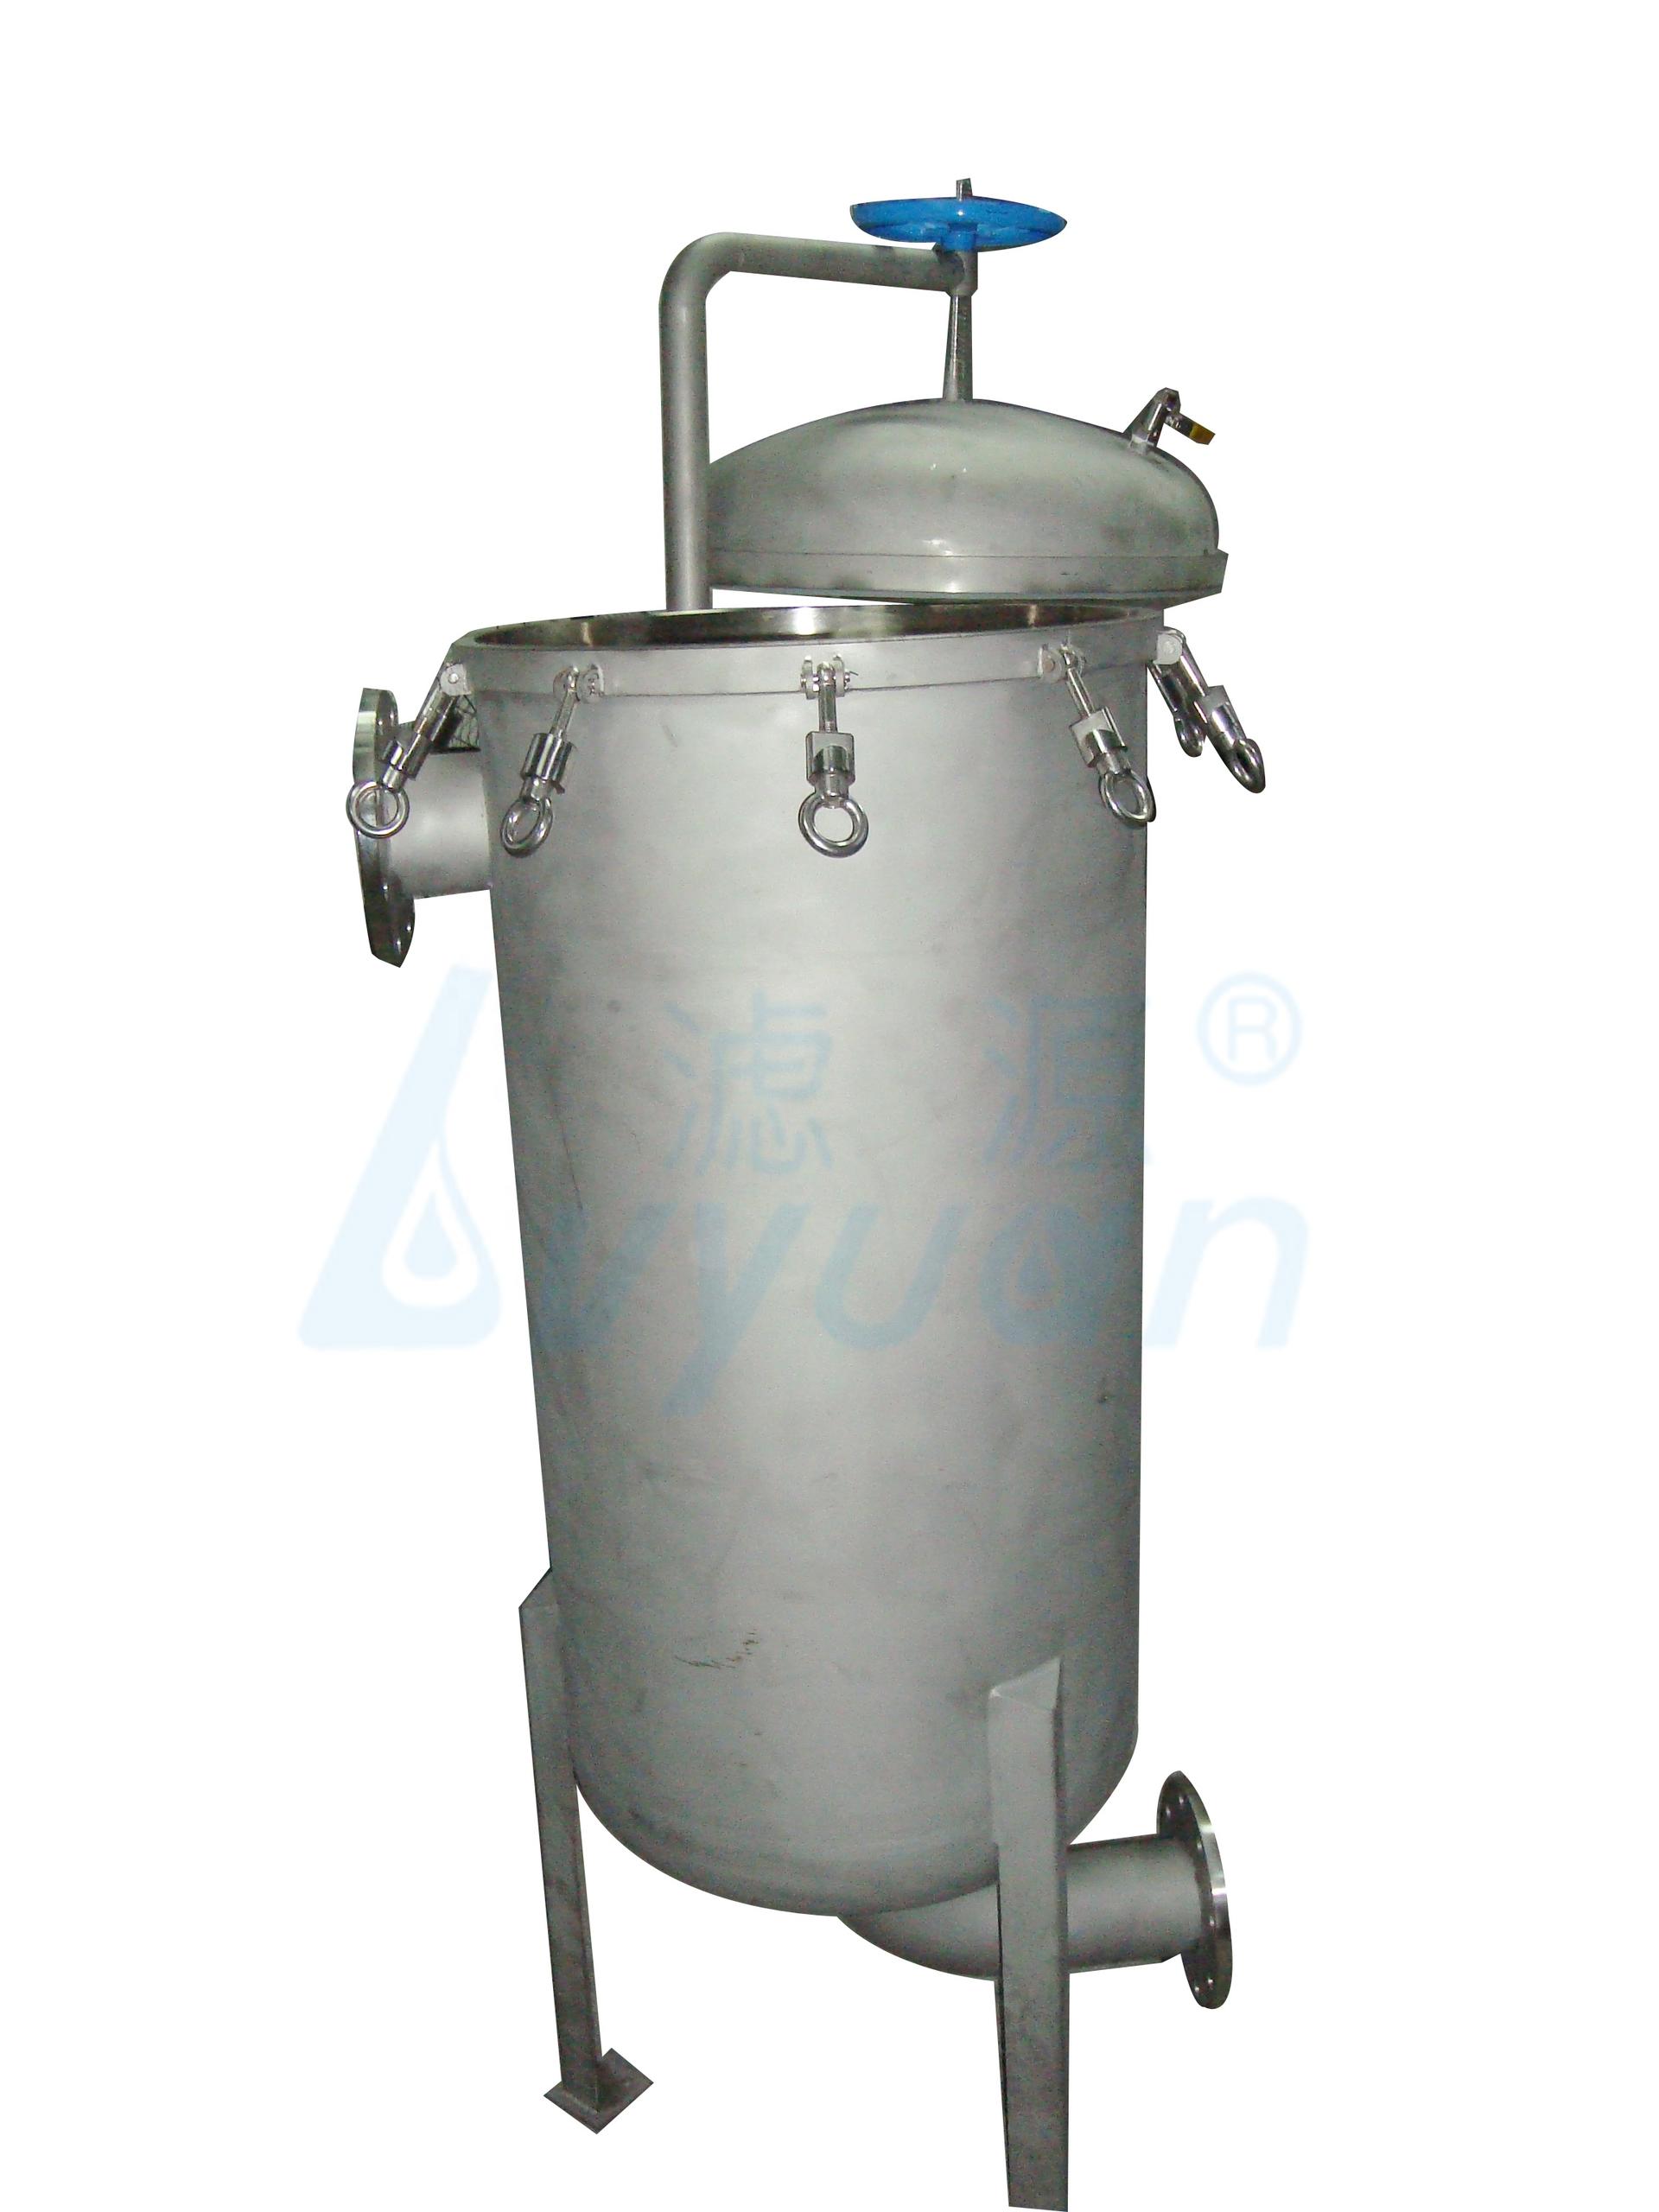 multi bag filter housing stainless steel 304 ss316 industrial water bag filter for liquid filtration 1 5 micron filter bag